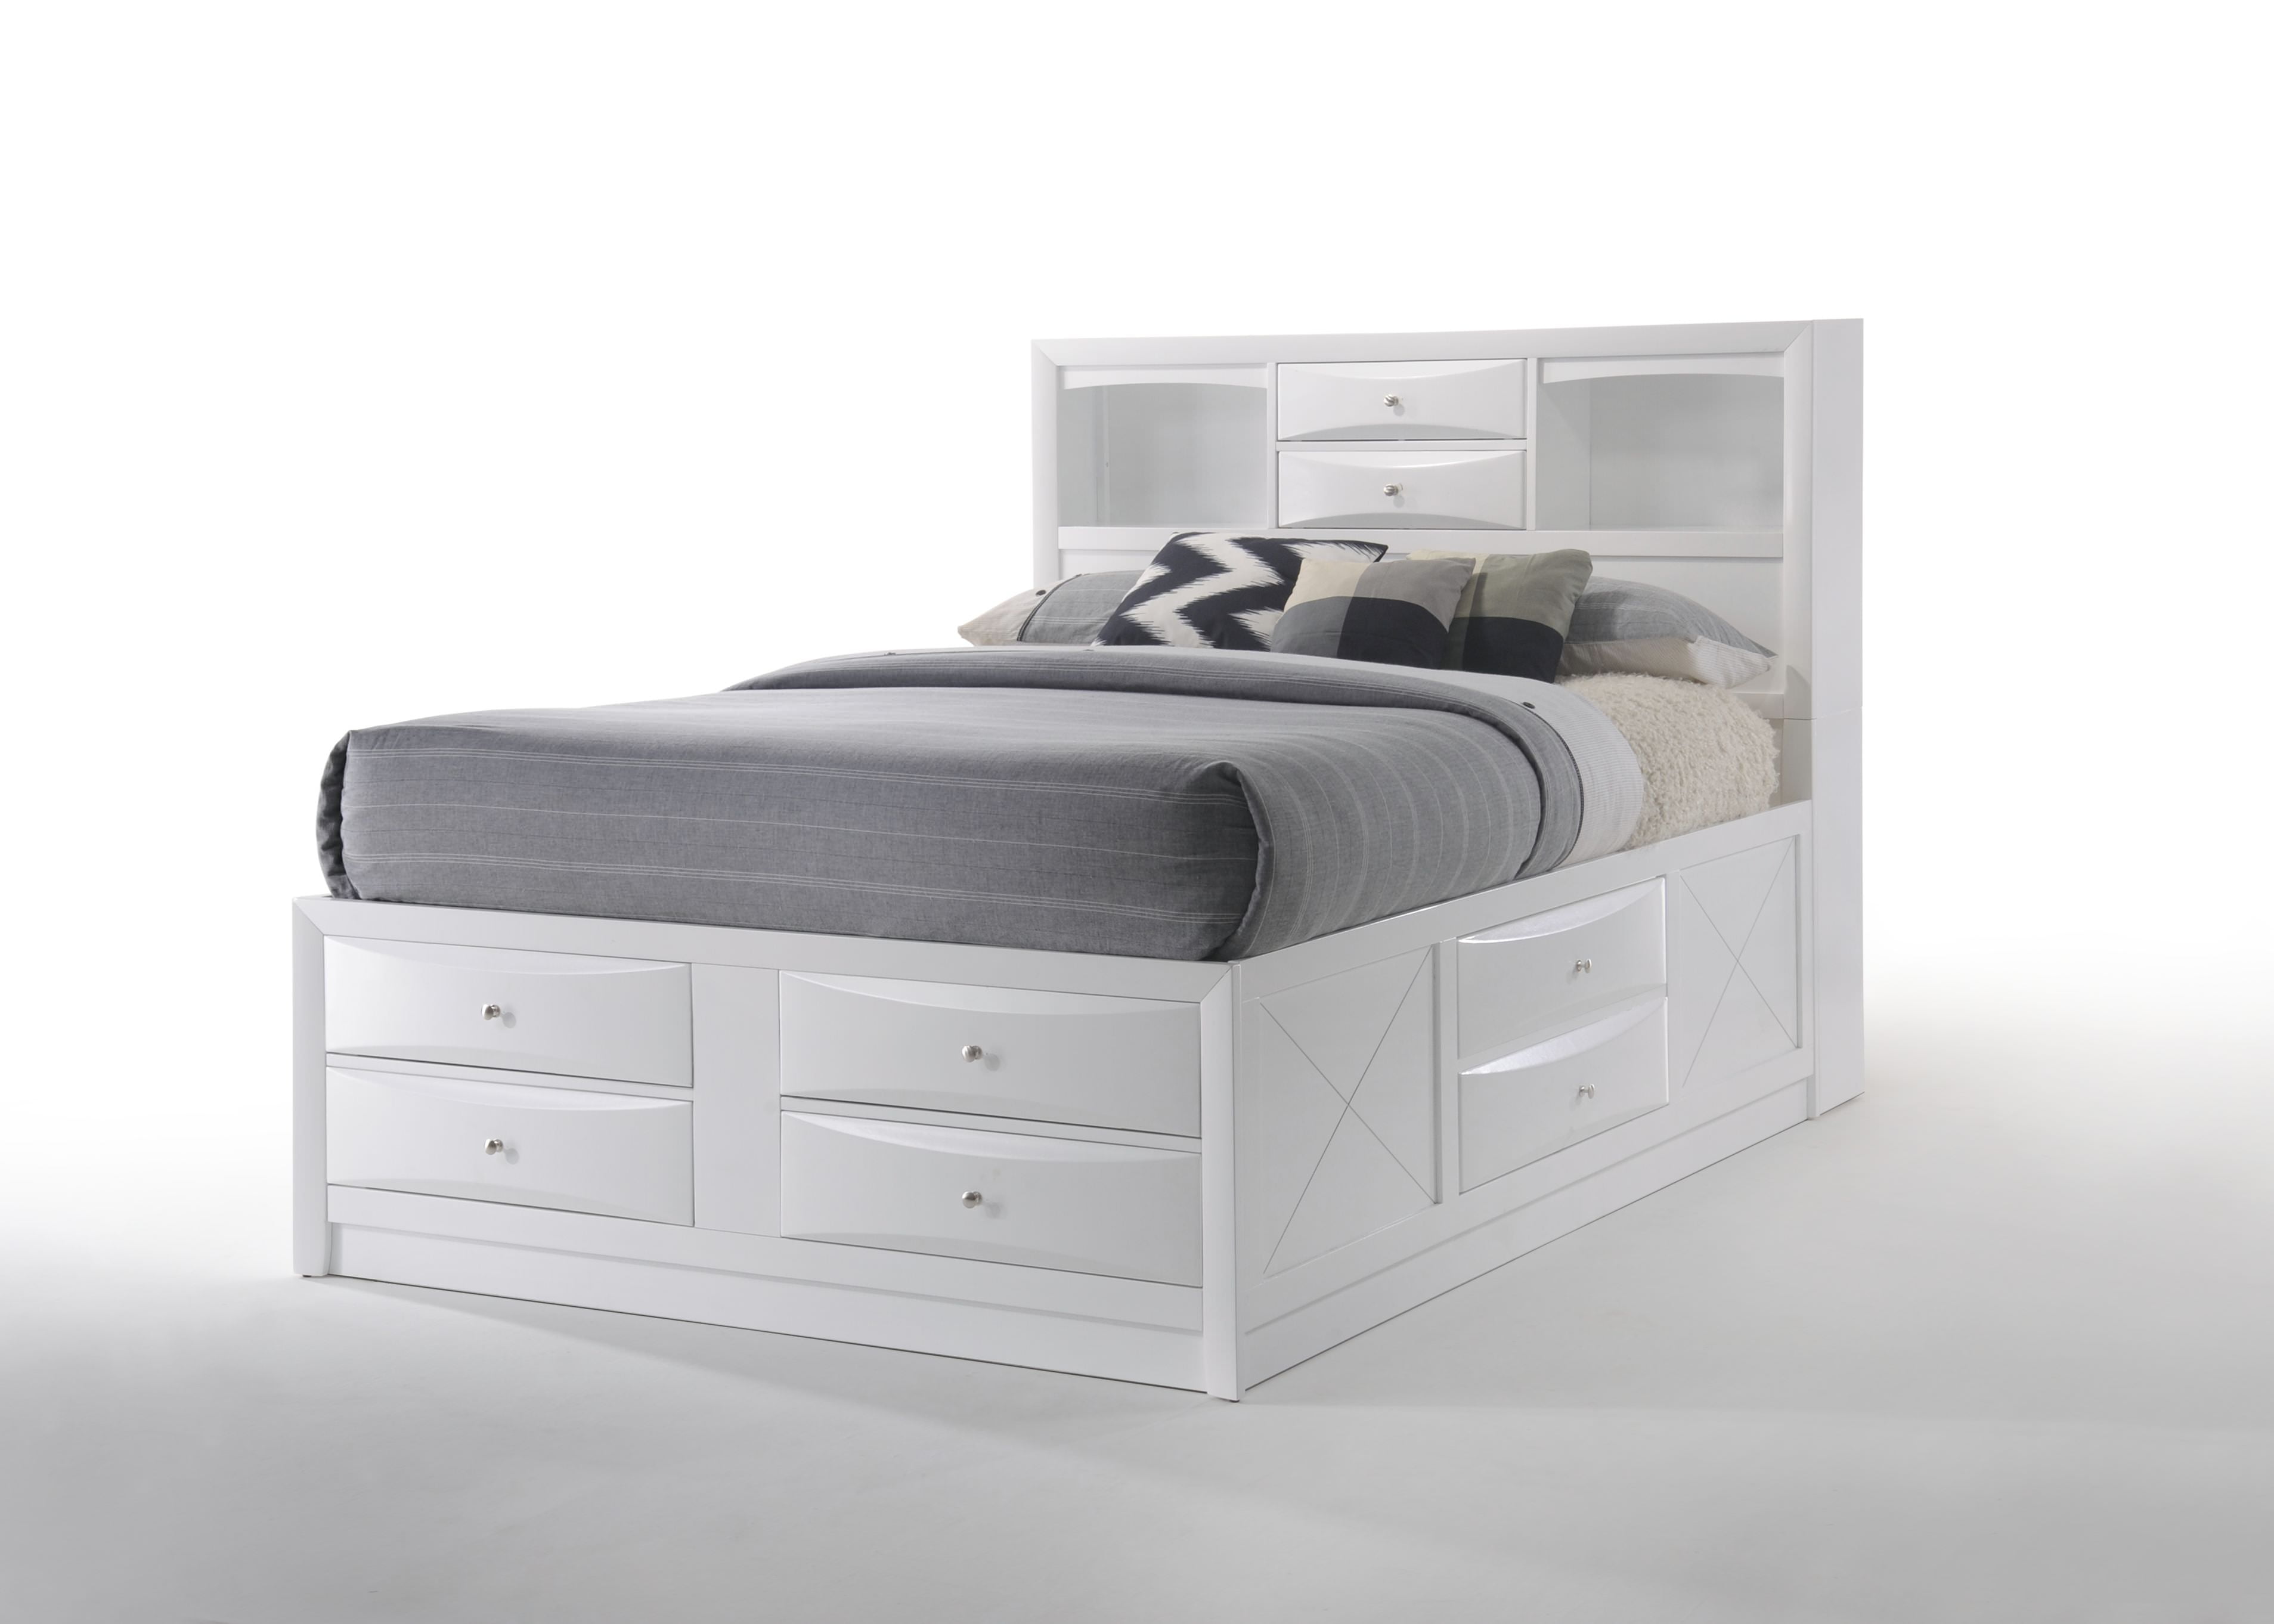 Picture of ACME 21710F 4 Piece Ireland Full Size Bed with Storage - White